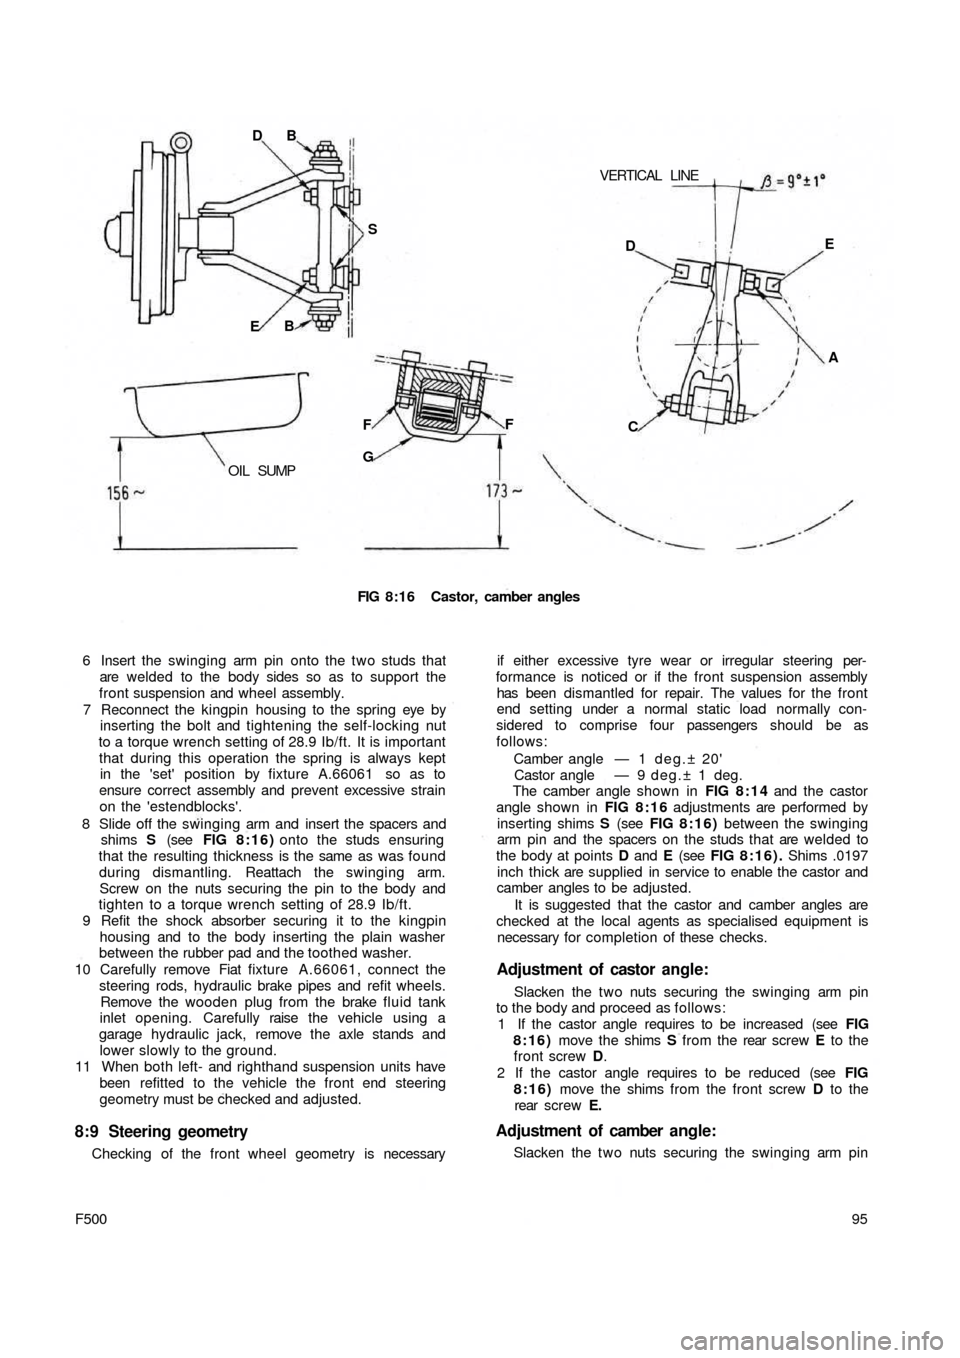 FIAT 500 1972 1.G Workshop Manual VERTICAL  LINE DB
S
EB
OIL  SUMPF
GF
FIG 8:16 Castor, camber angles
6 Insert the swinging arm pin onto the two studs that
are welded  to the  body sides so as to support the
front suspension and wheel